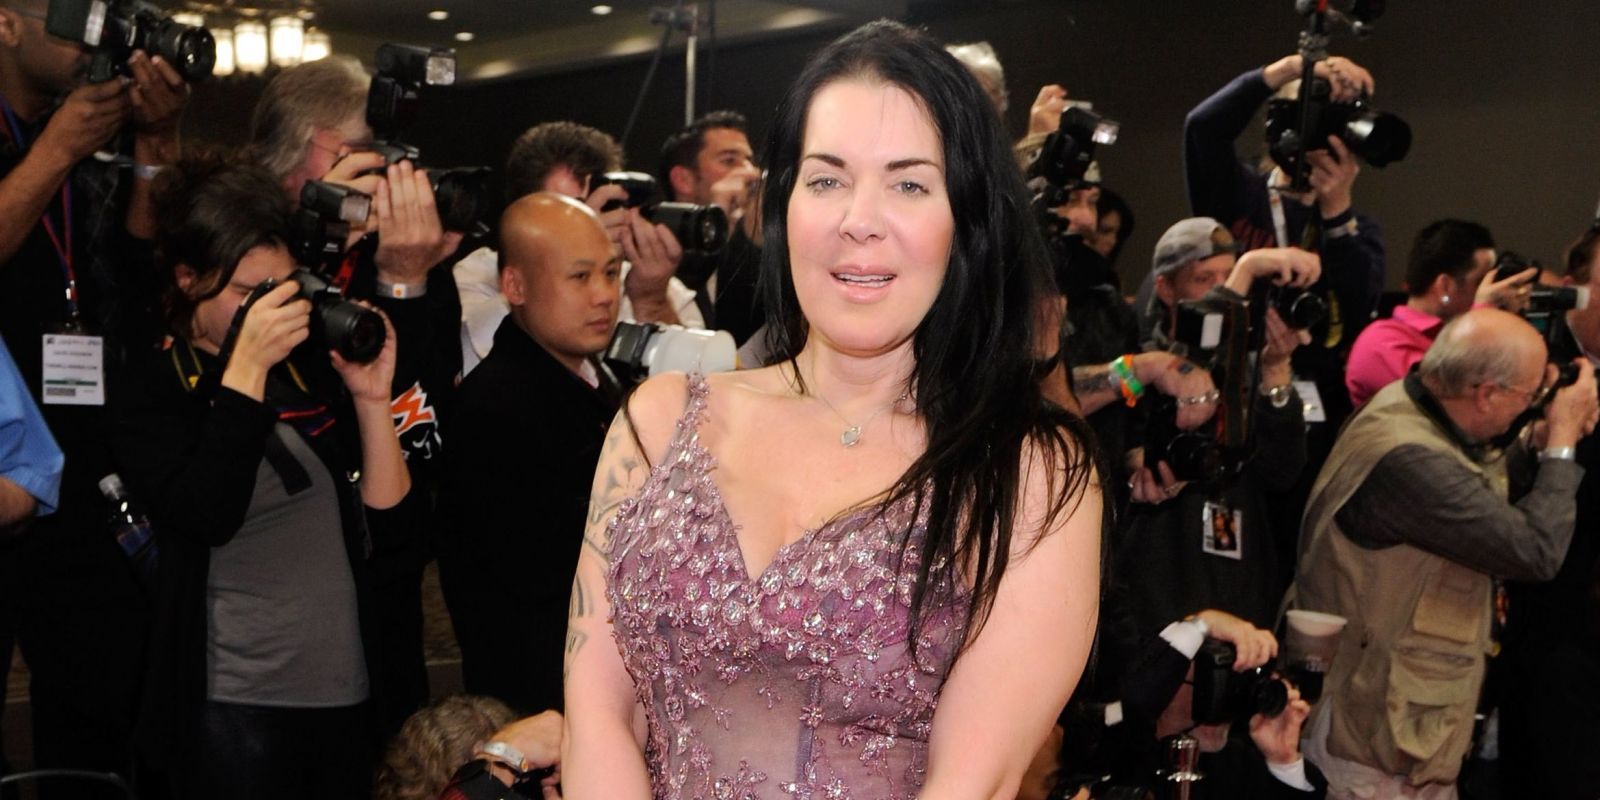 Chyna at media event